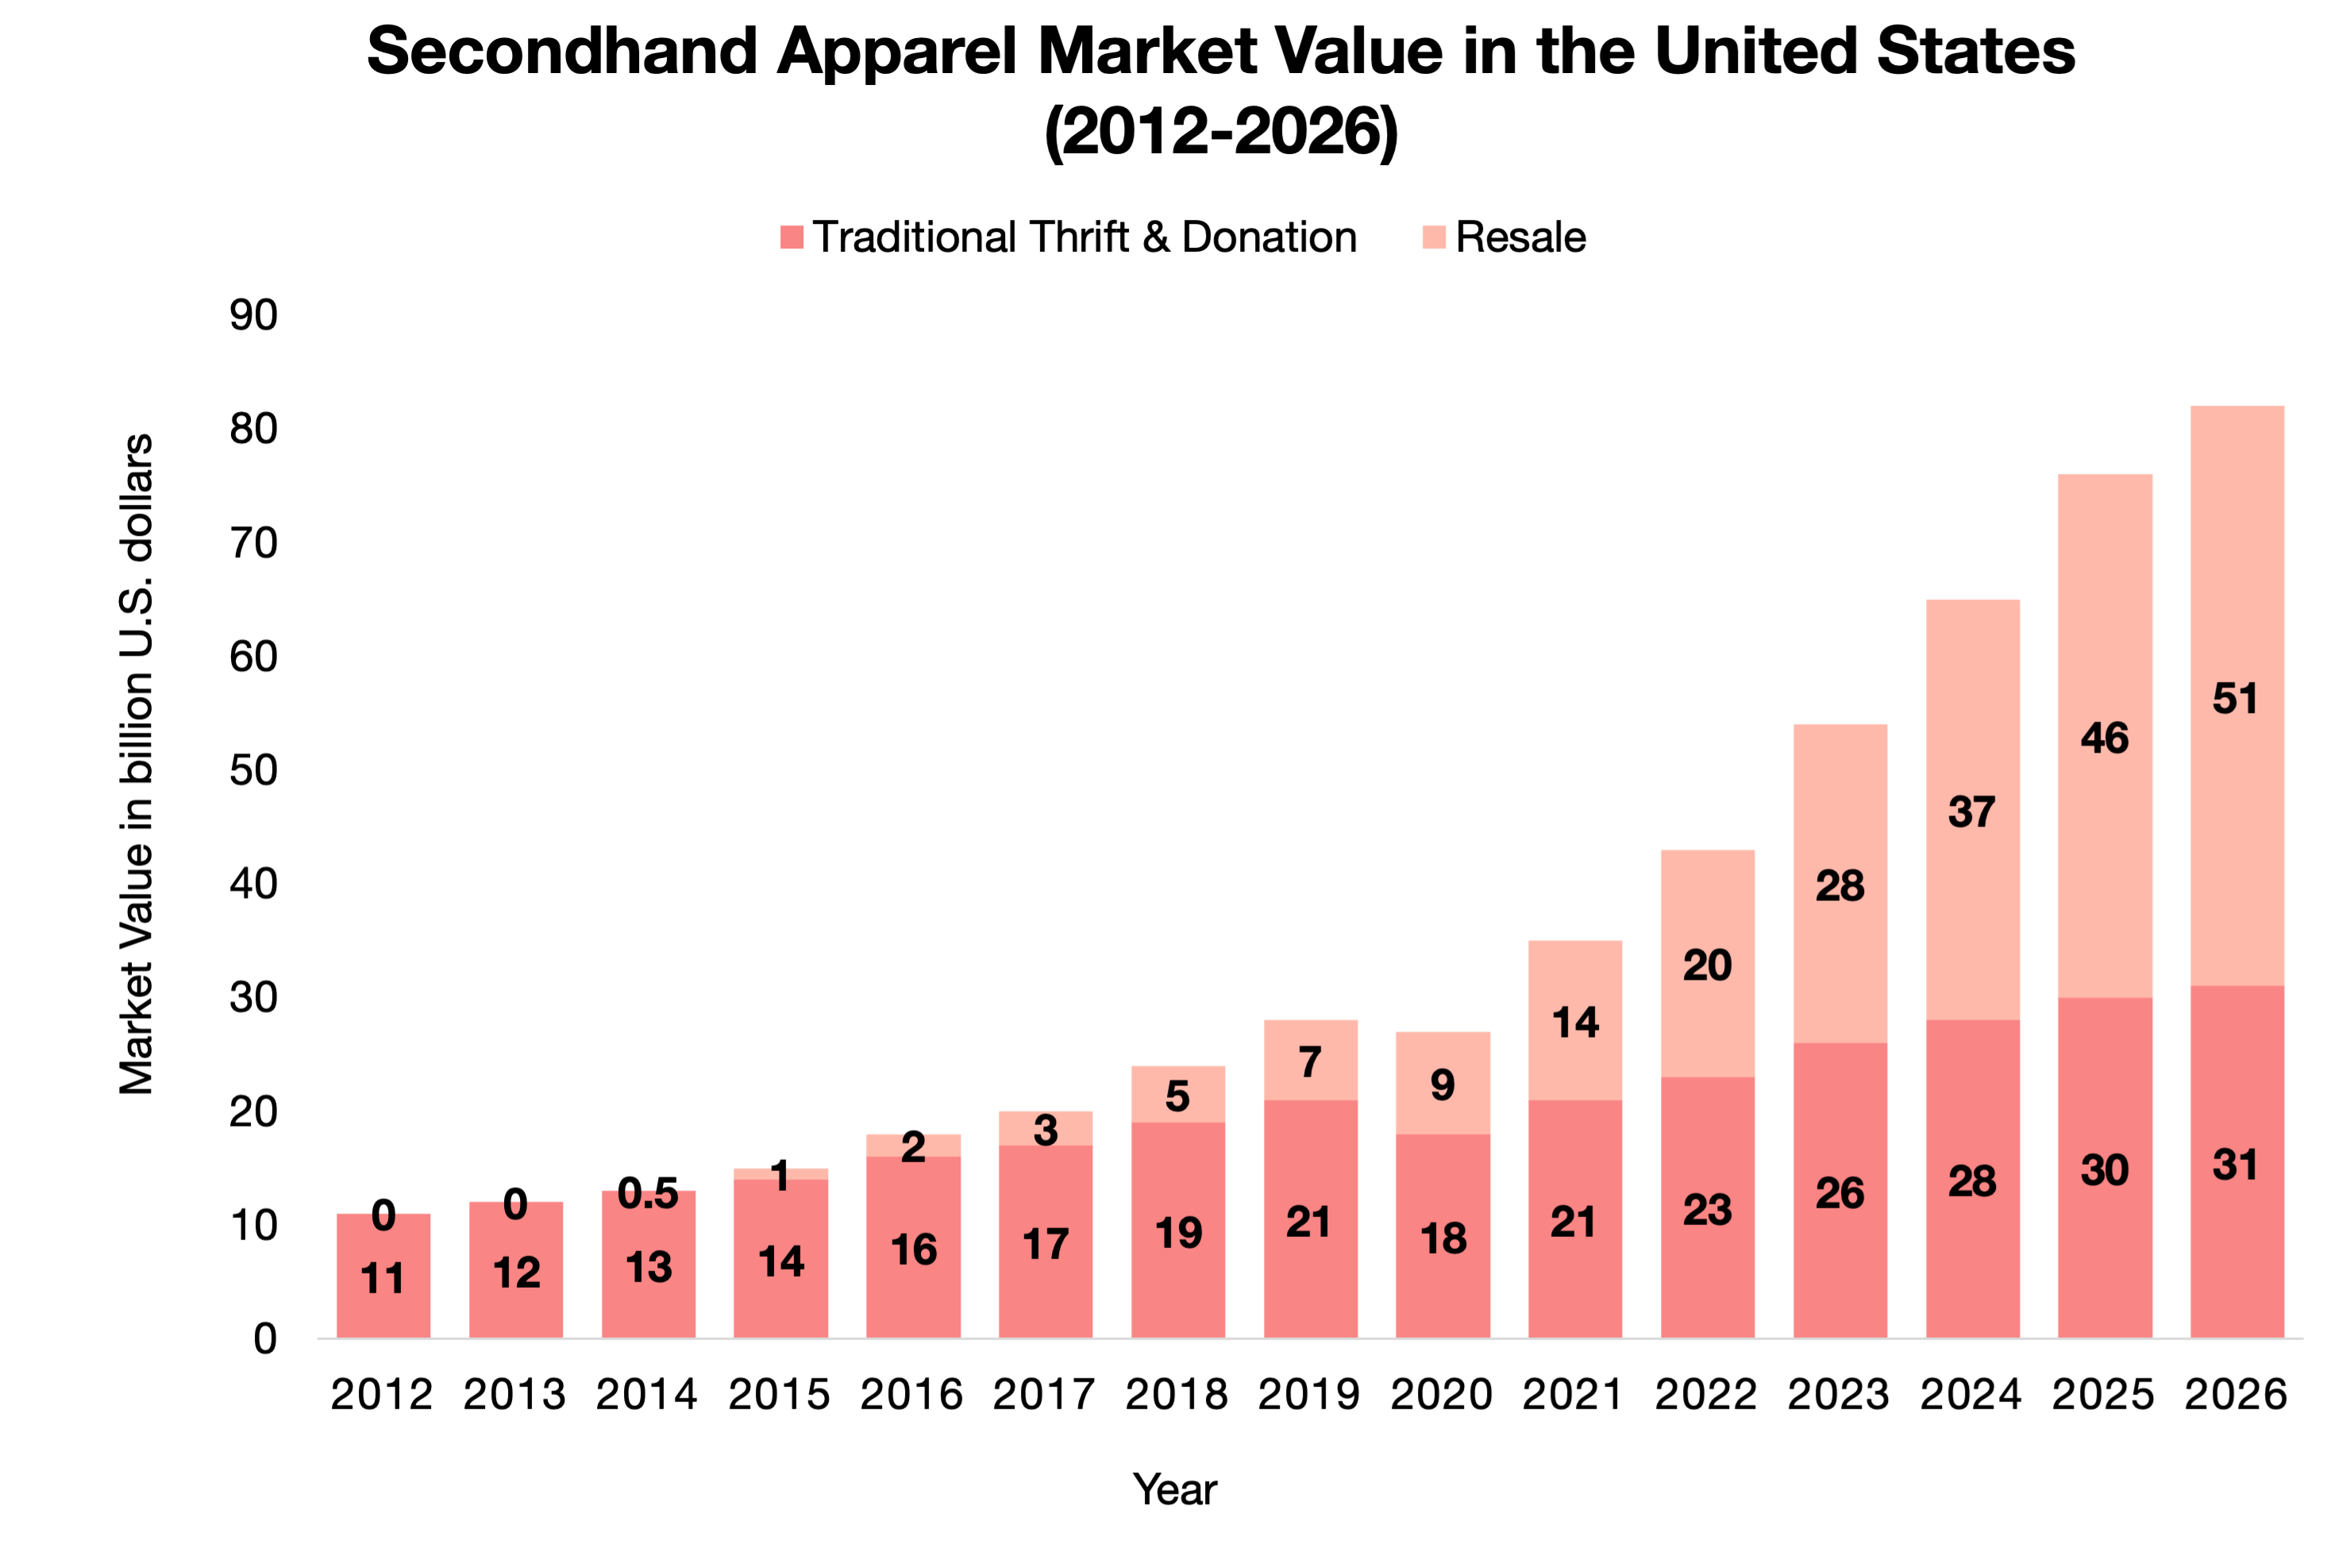 High End Apparel Market to Witness Massive Growth from 2022